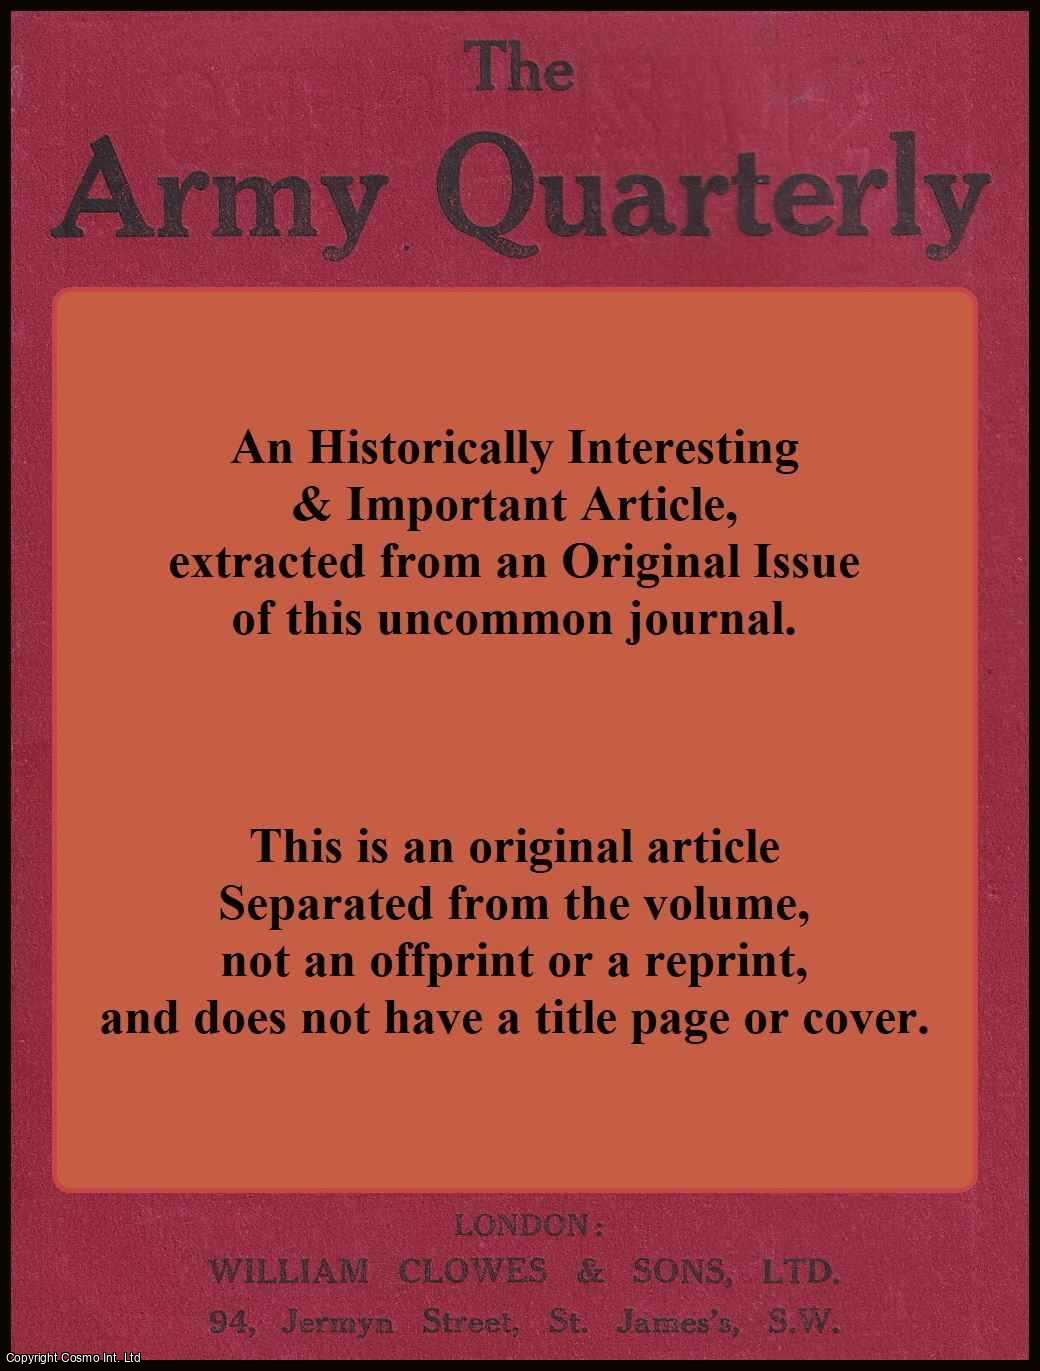 Major E.C. Pinder - The Question of Incentives. An original article from the Army Quarterly, 1932.